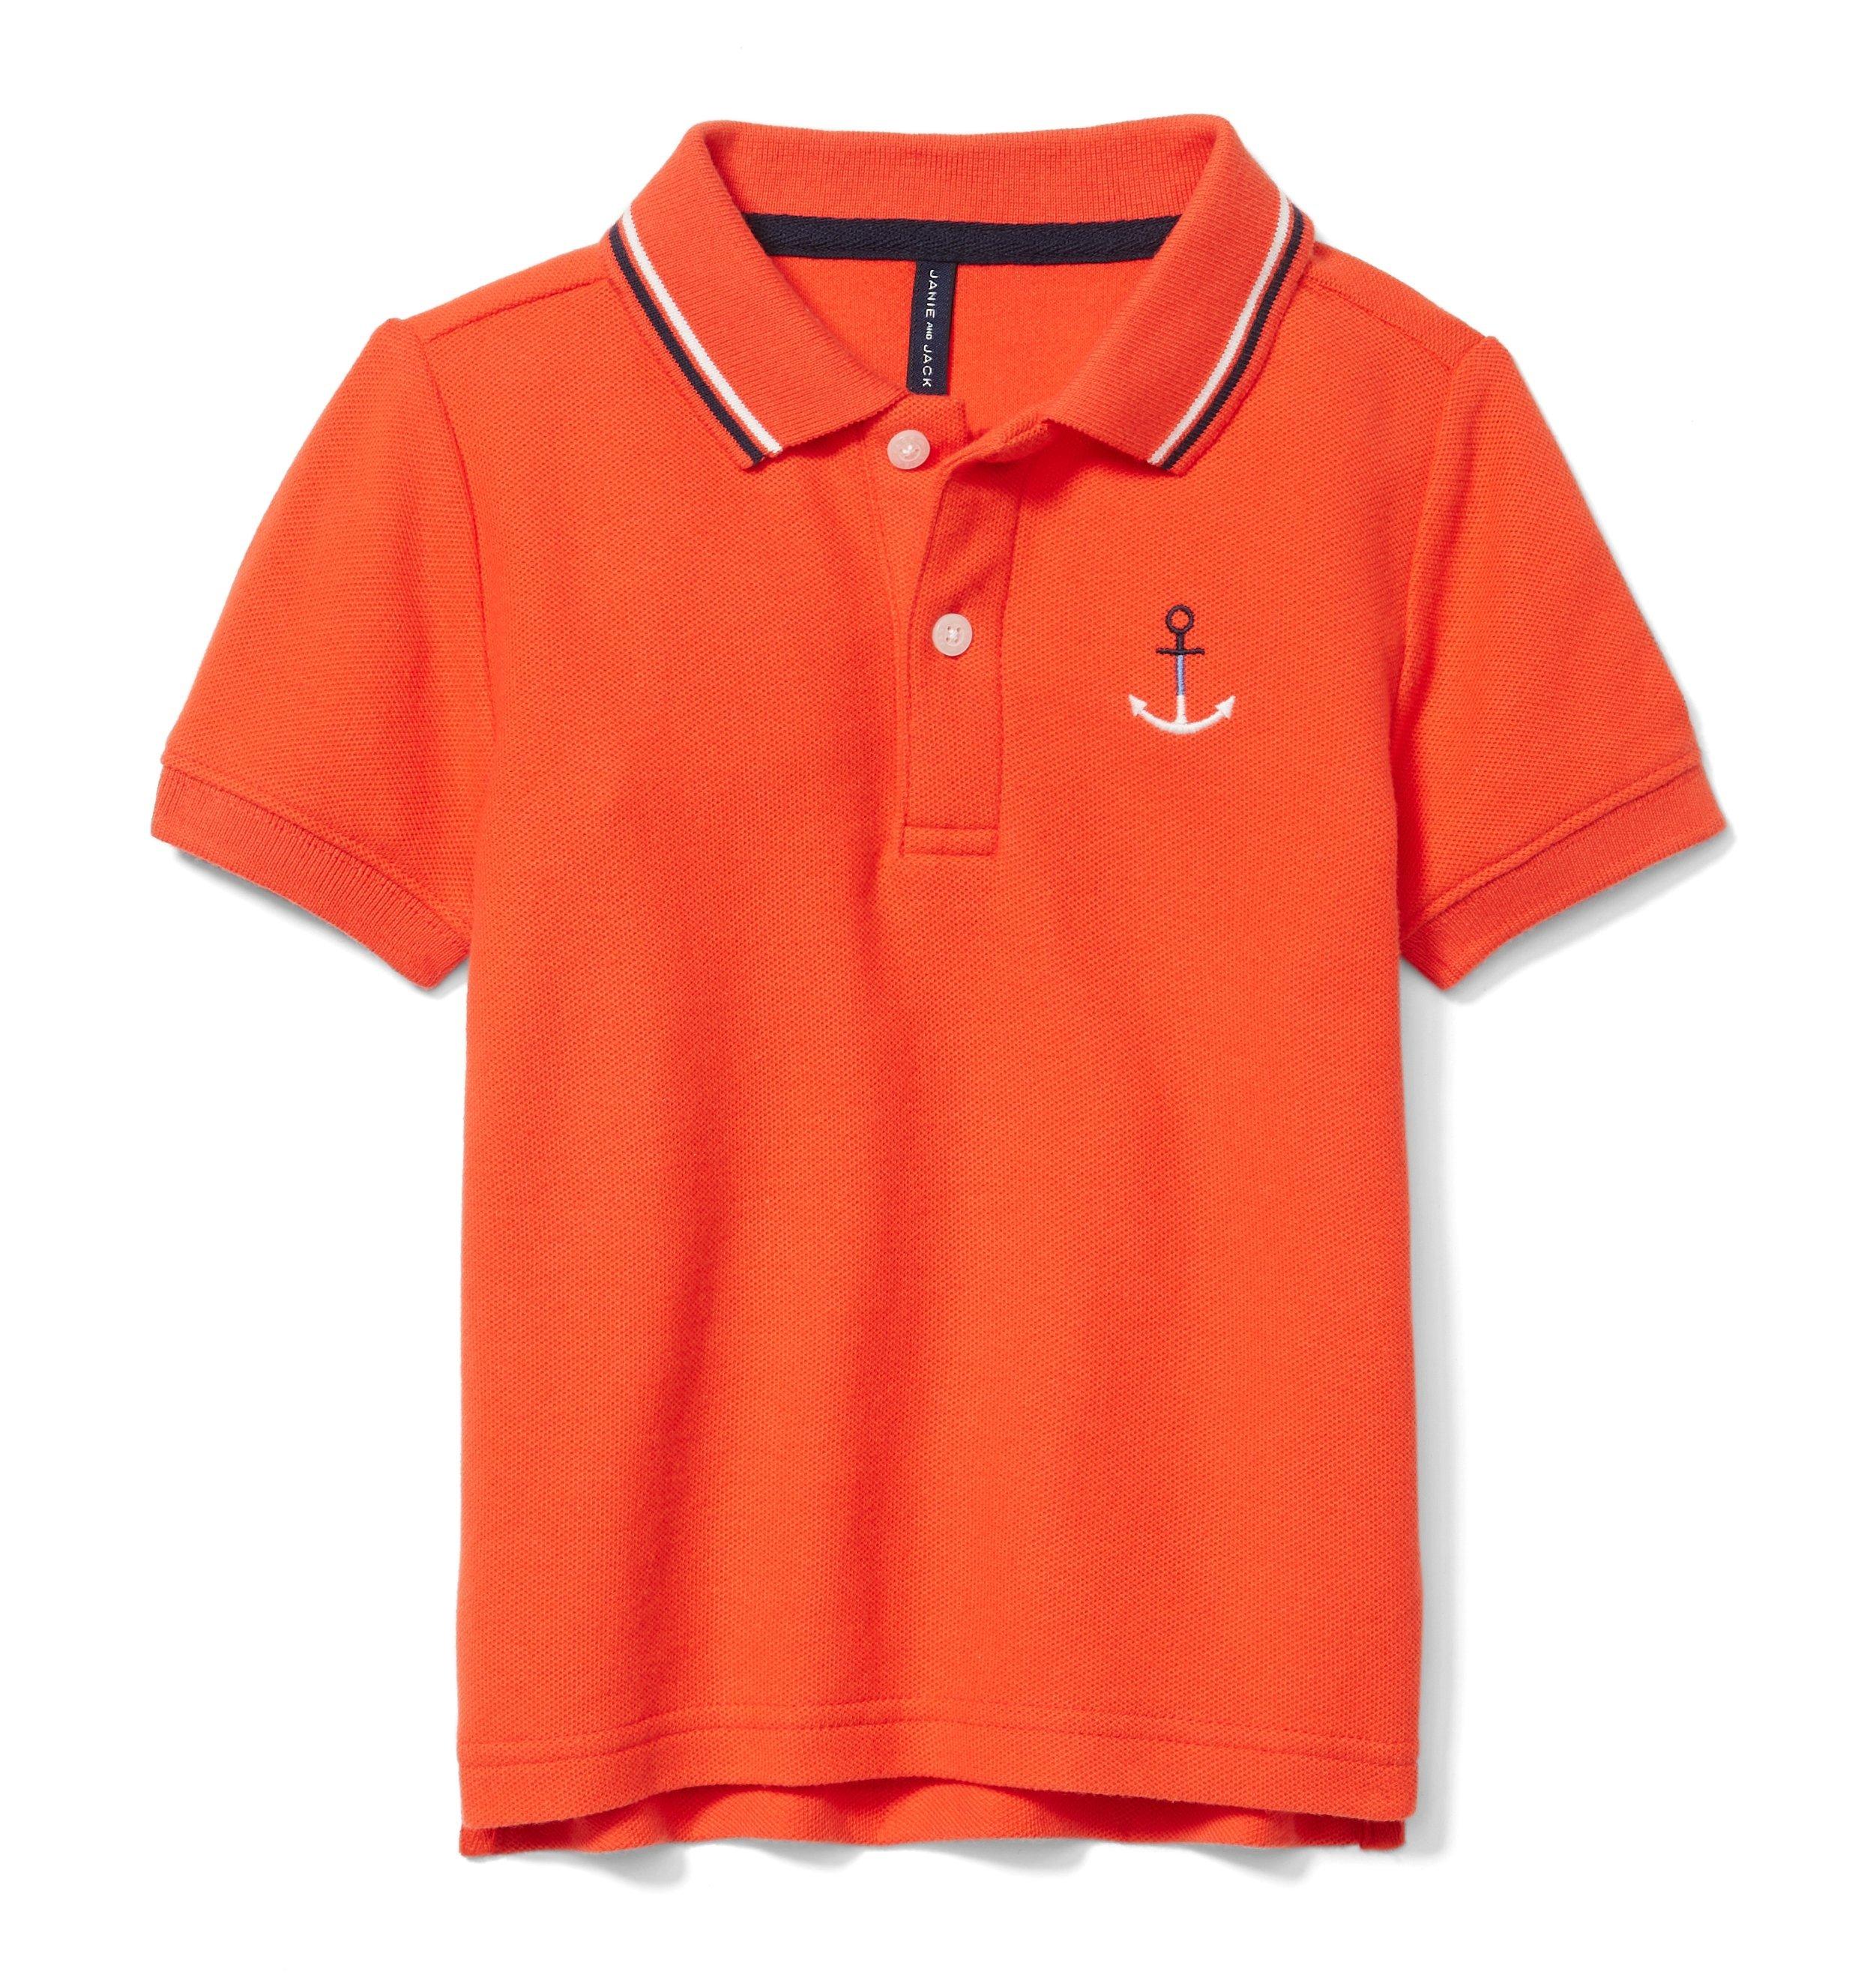 Embroidered Pique Polo image number 0